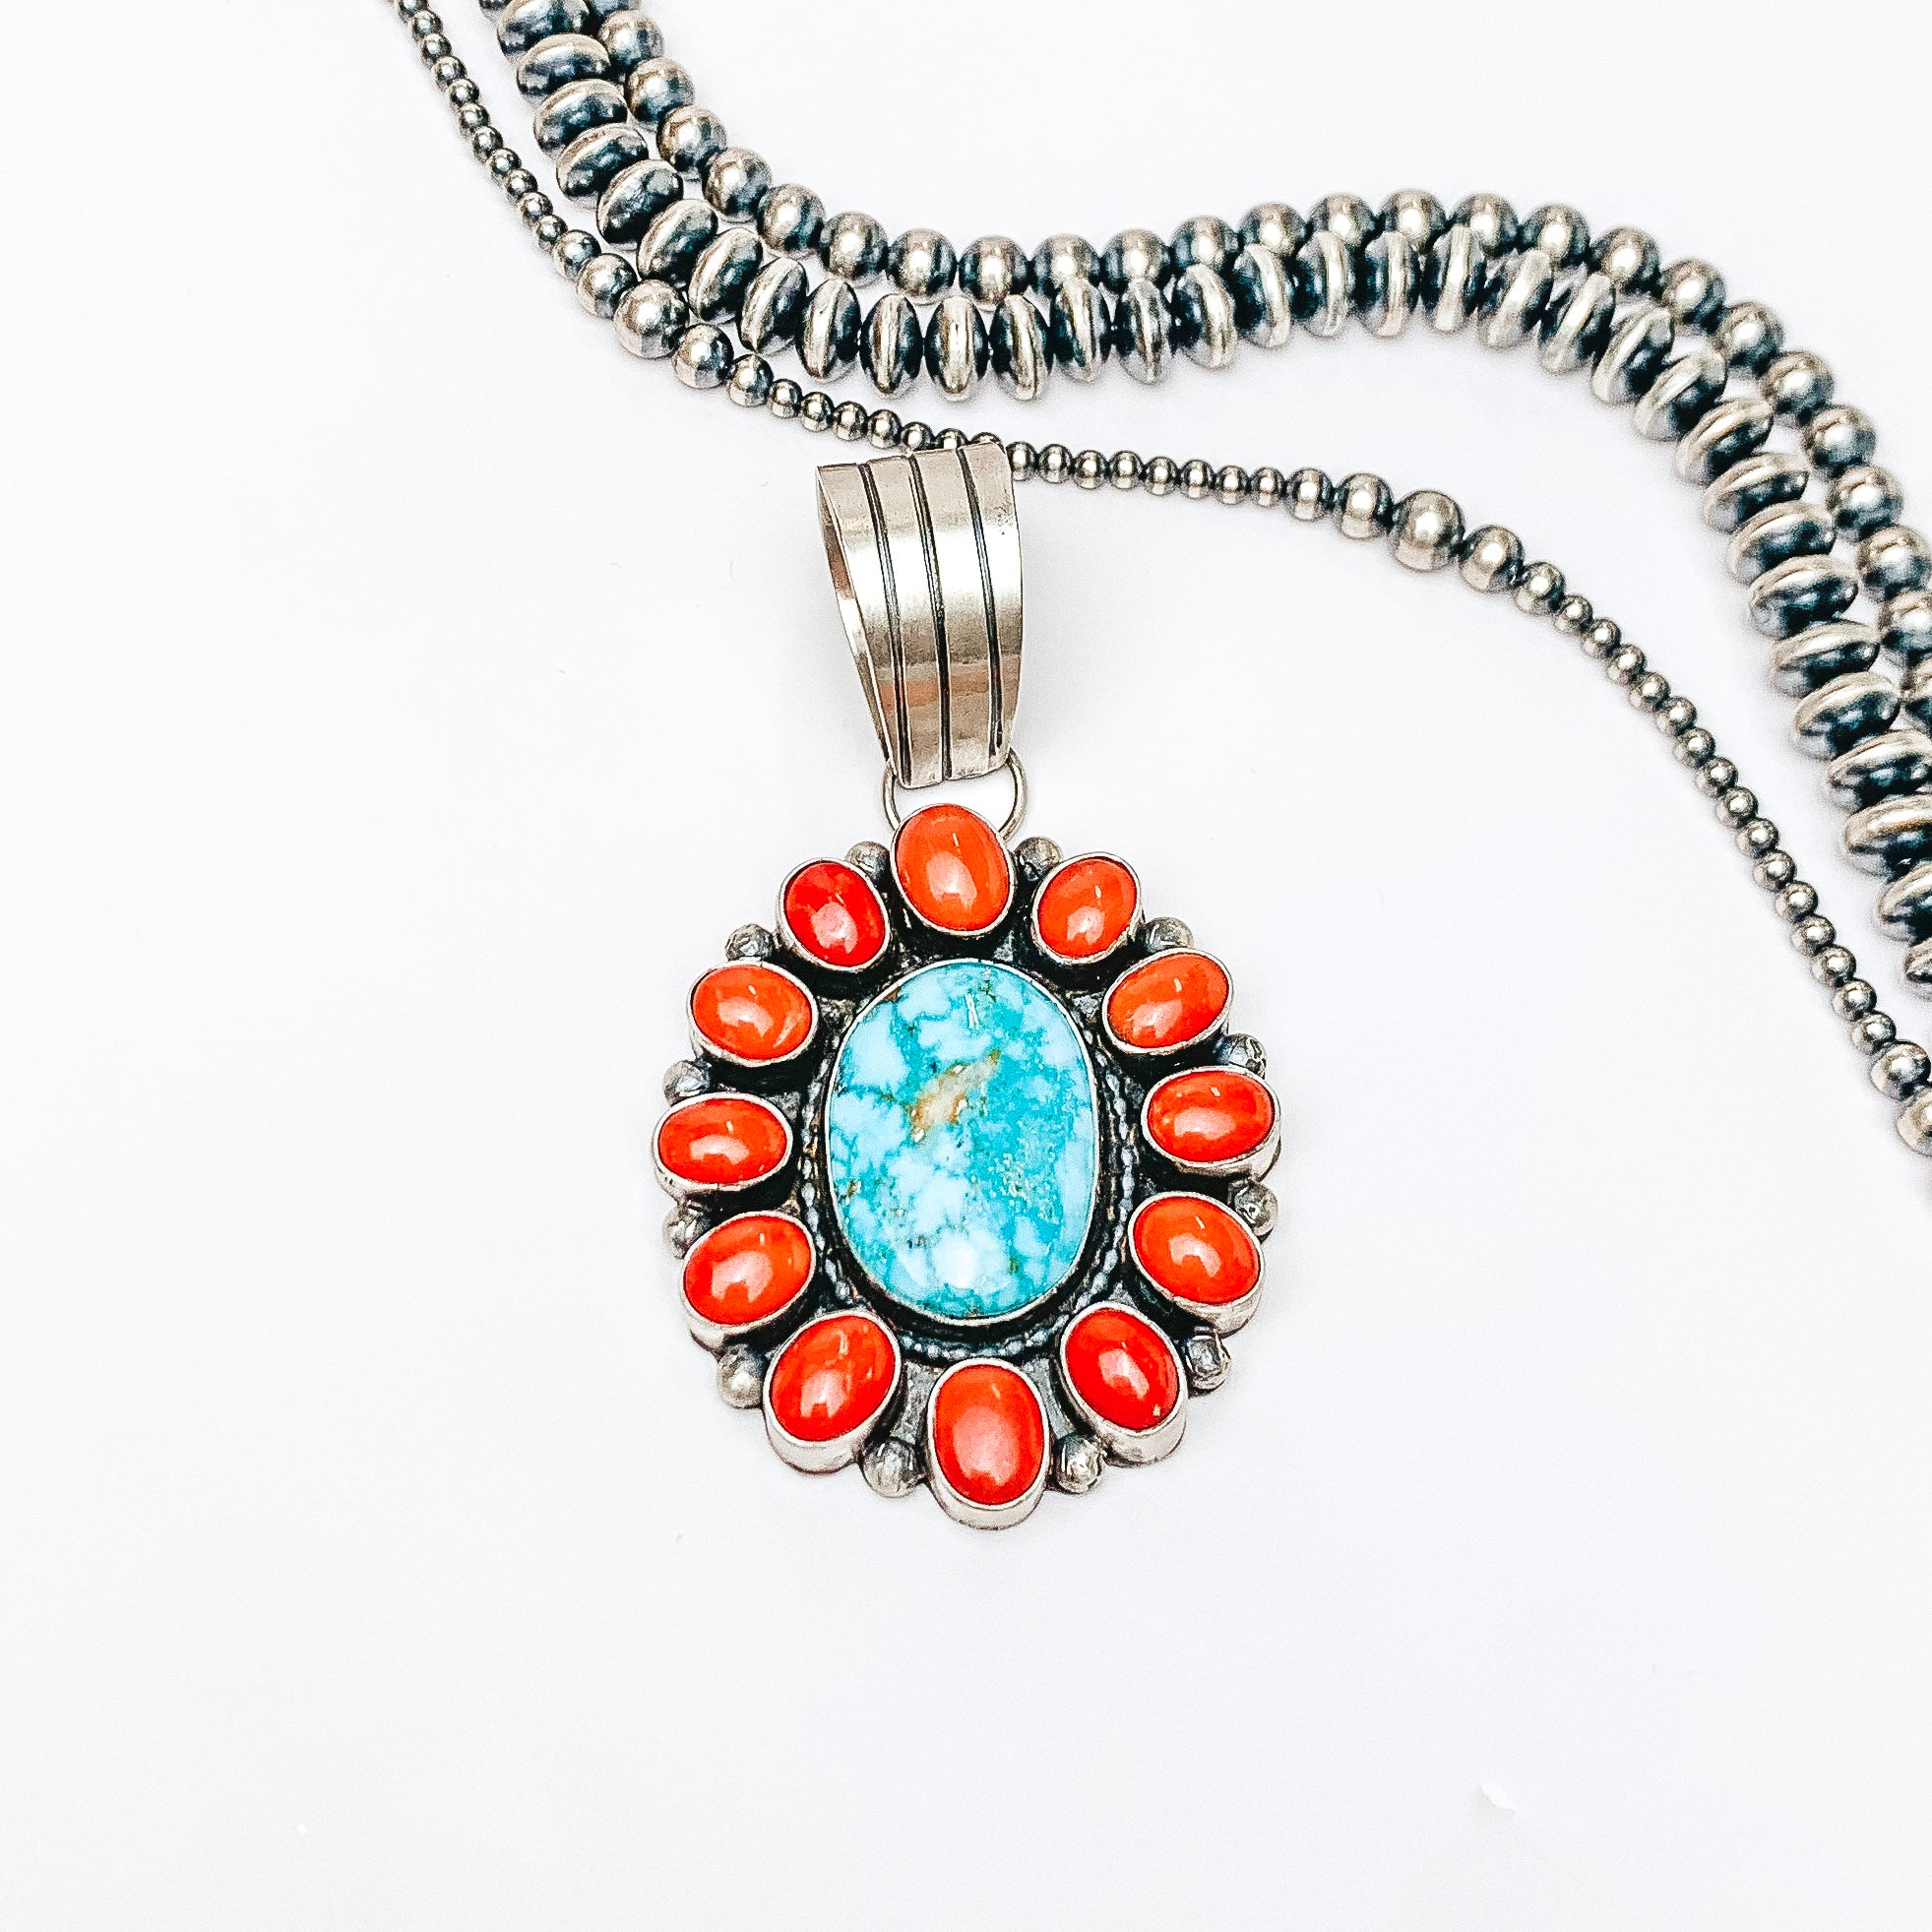 Centered in the picture is a large, round, turquoise and coral pendant. Above the pendant is navajo pearls, all on a white background. 